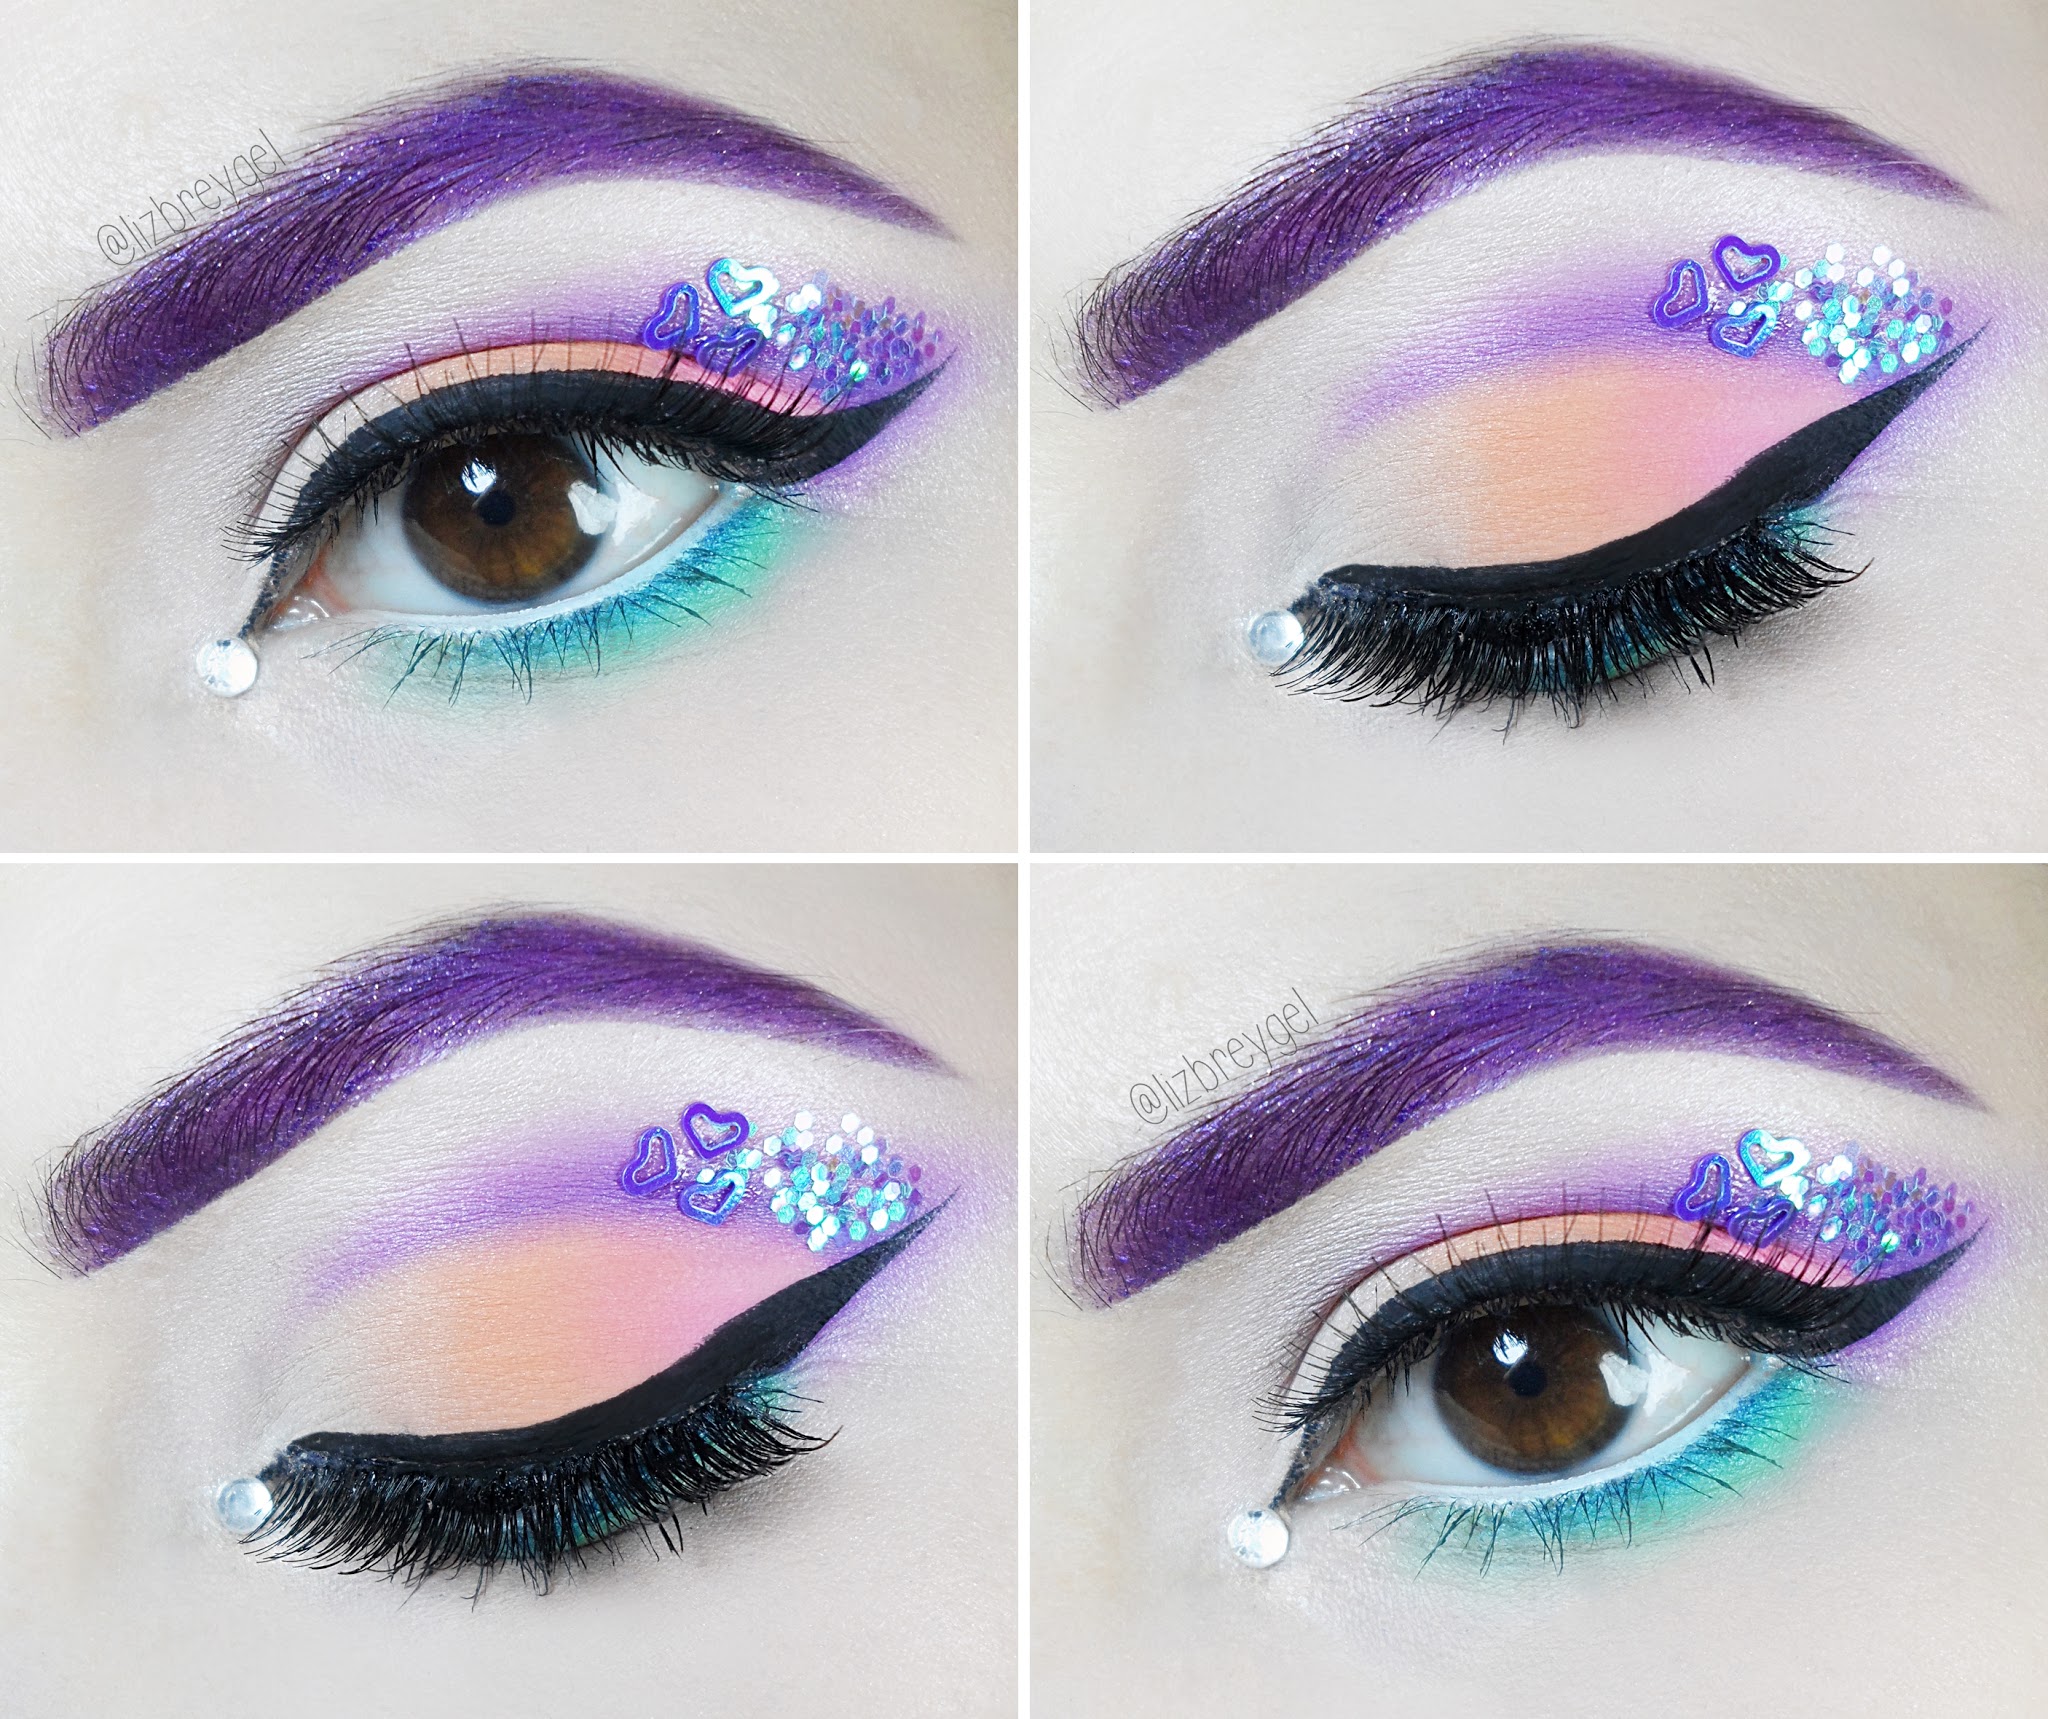 a close-up of an eye with a pastel unicor-inspired makeup look and eyeliner